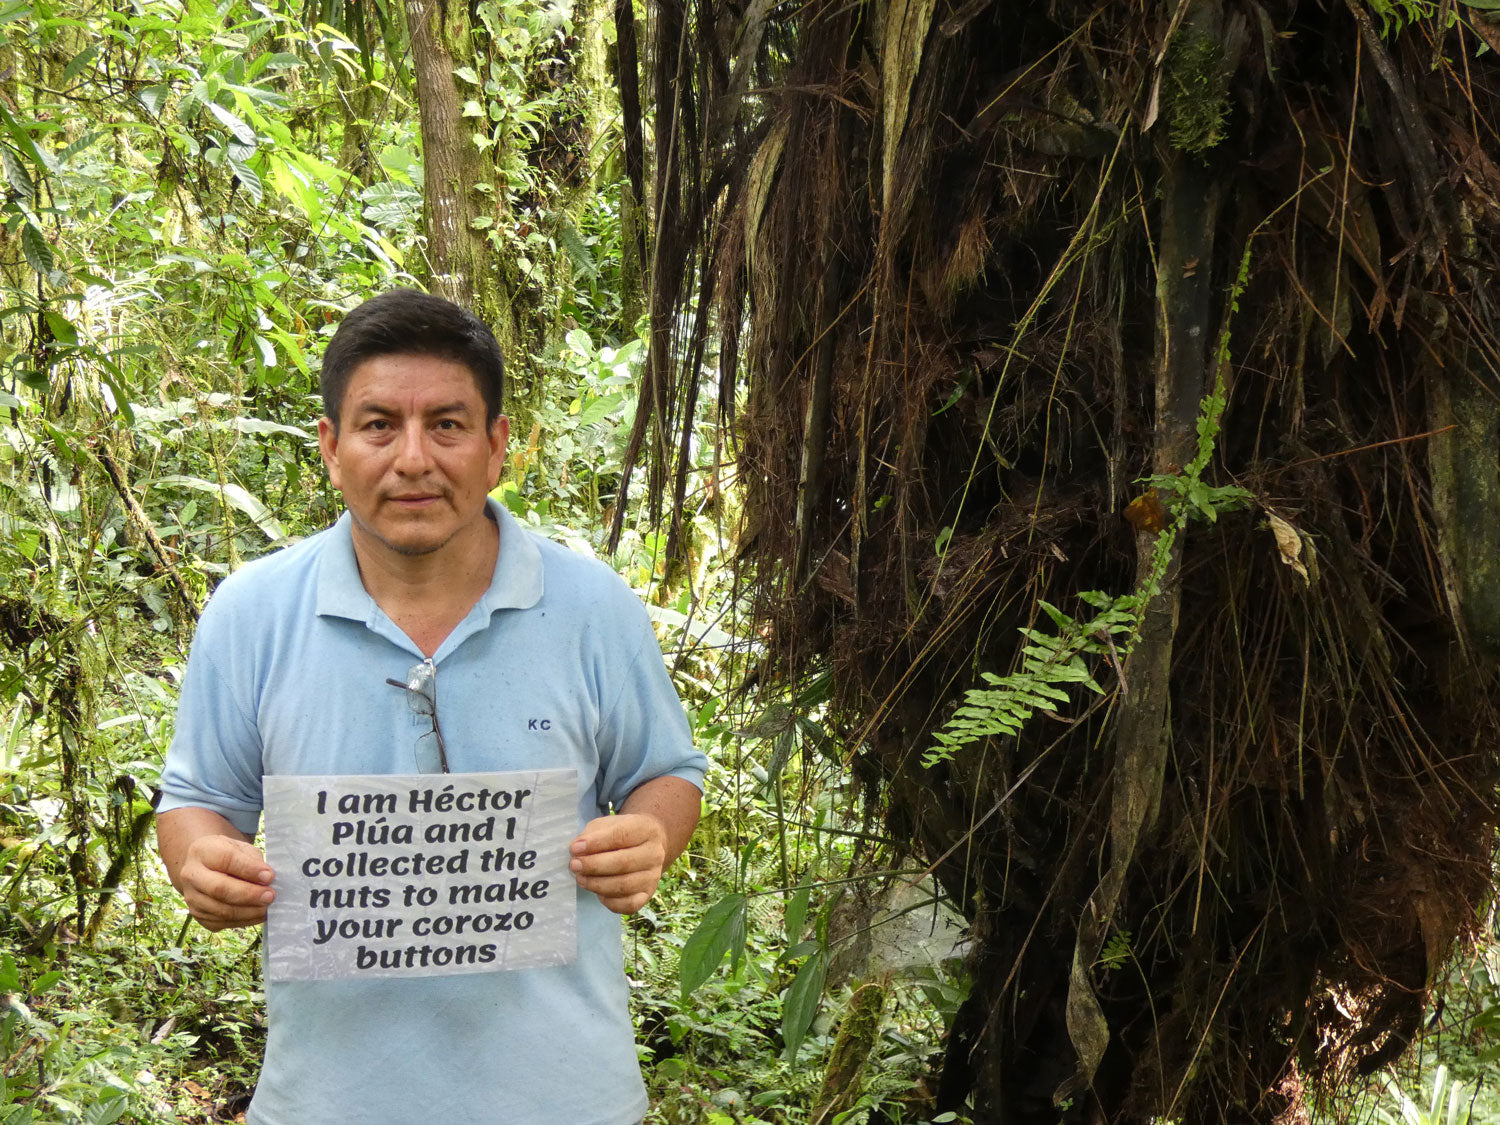 Man stands in the Ecuador rainforest by a Tagua Palm holding a sign with text: 'I am Hector Plua and I collected the nuts to make your corozo buttons'